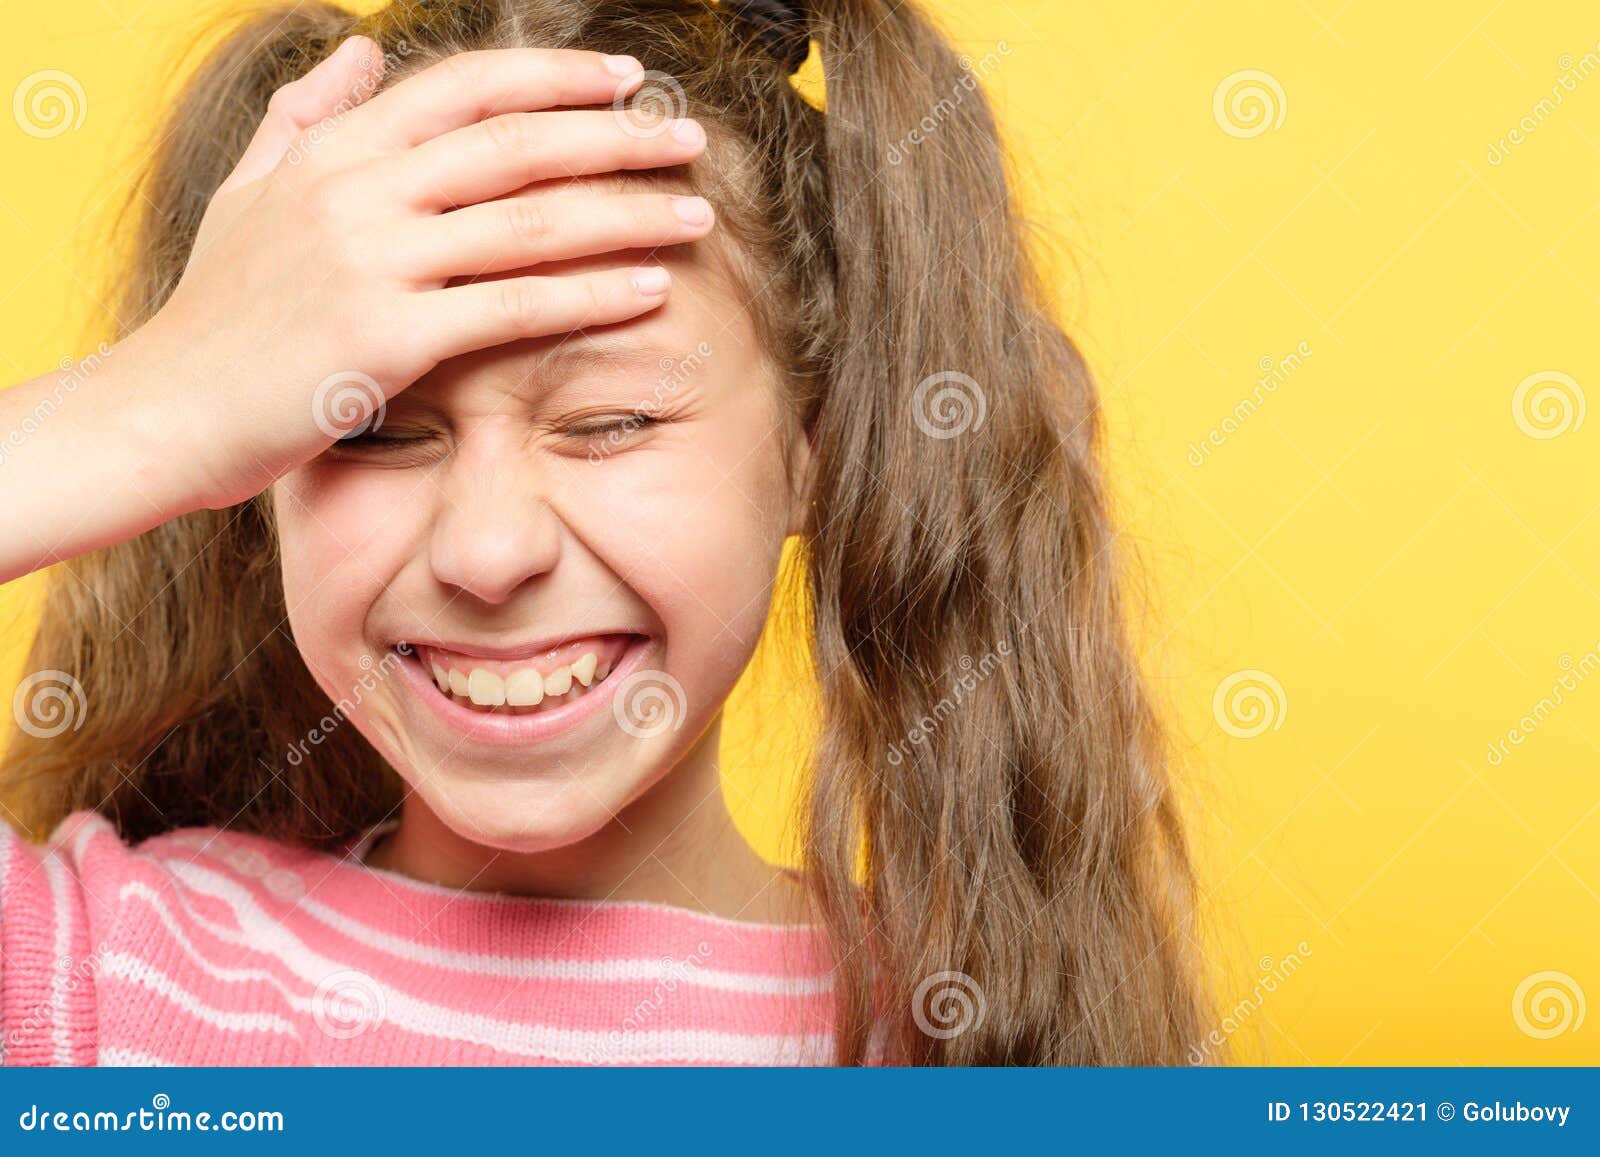 Laughing Embarrassed Girl Cover Forehead Facepalm Stock Image Image Free Download Nude Photo